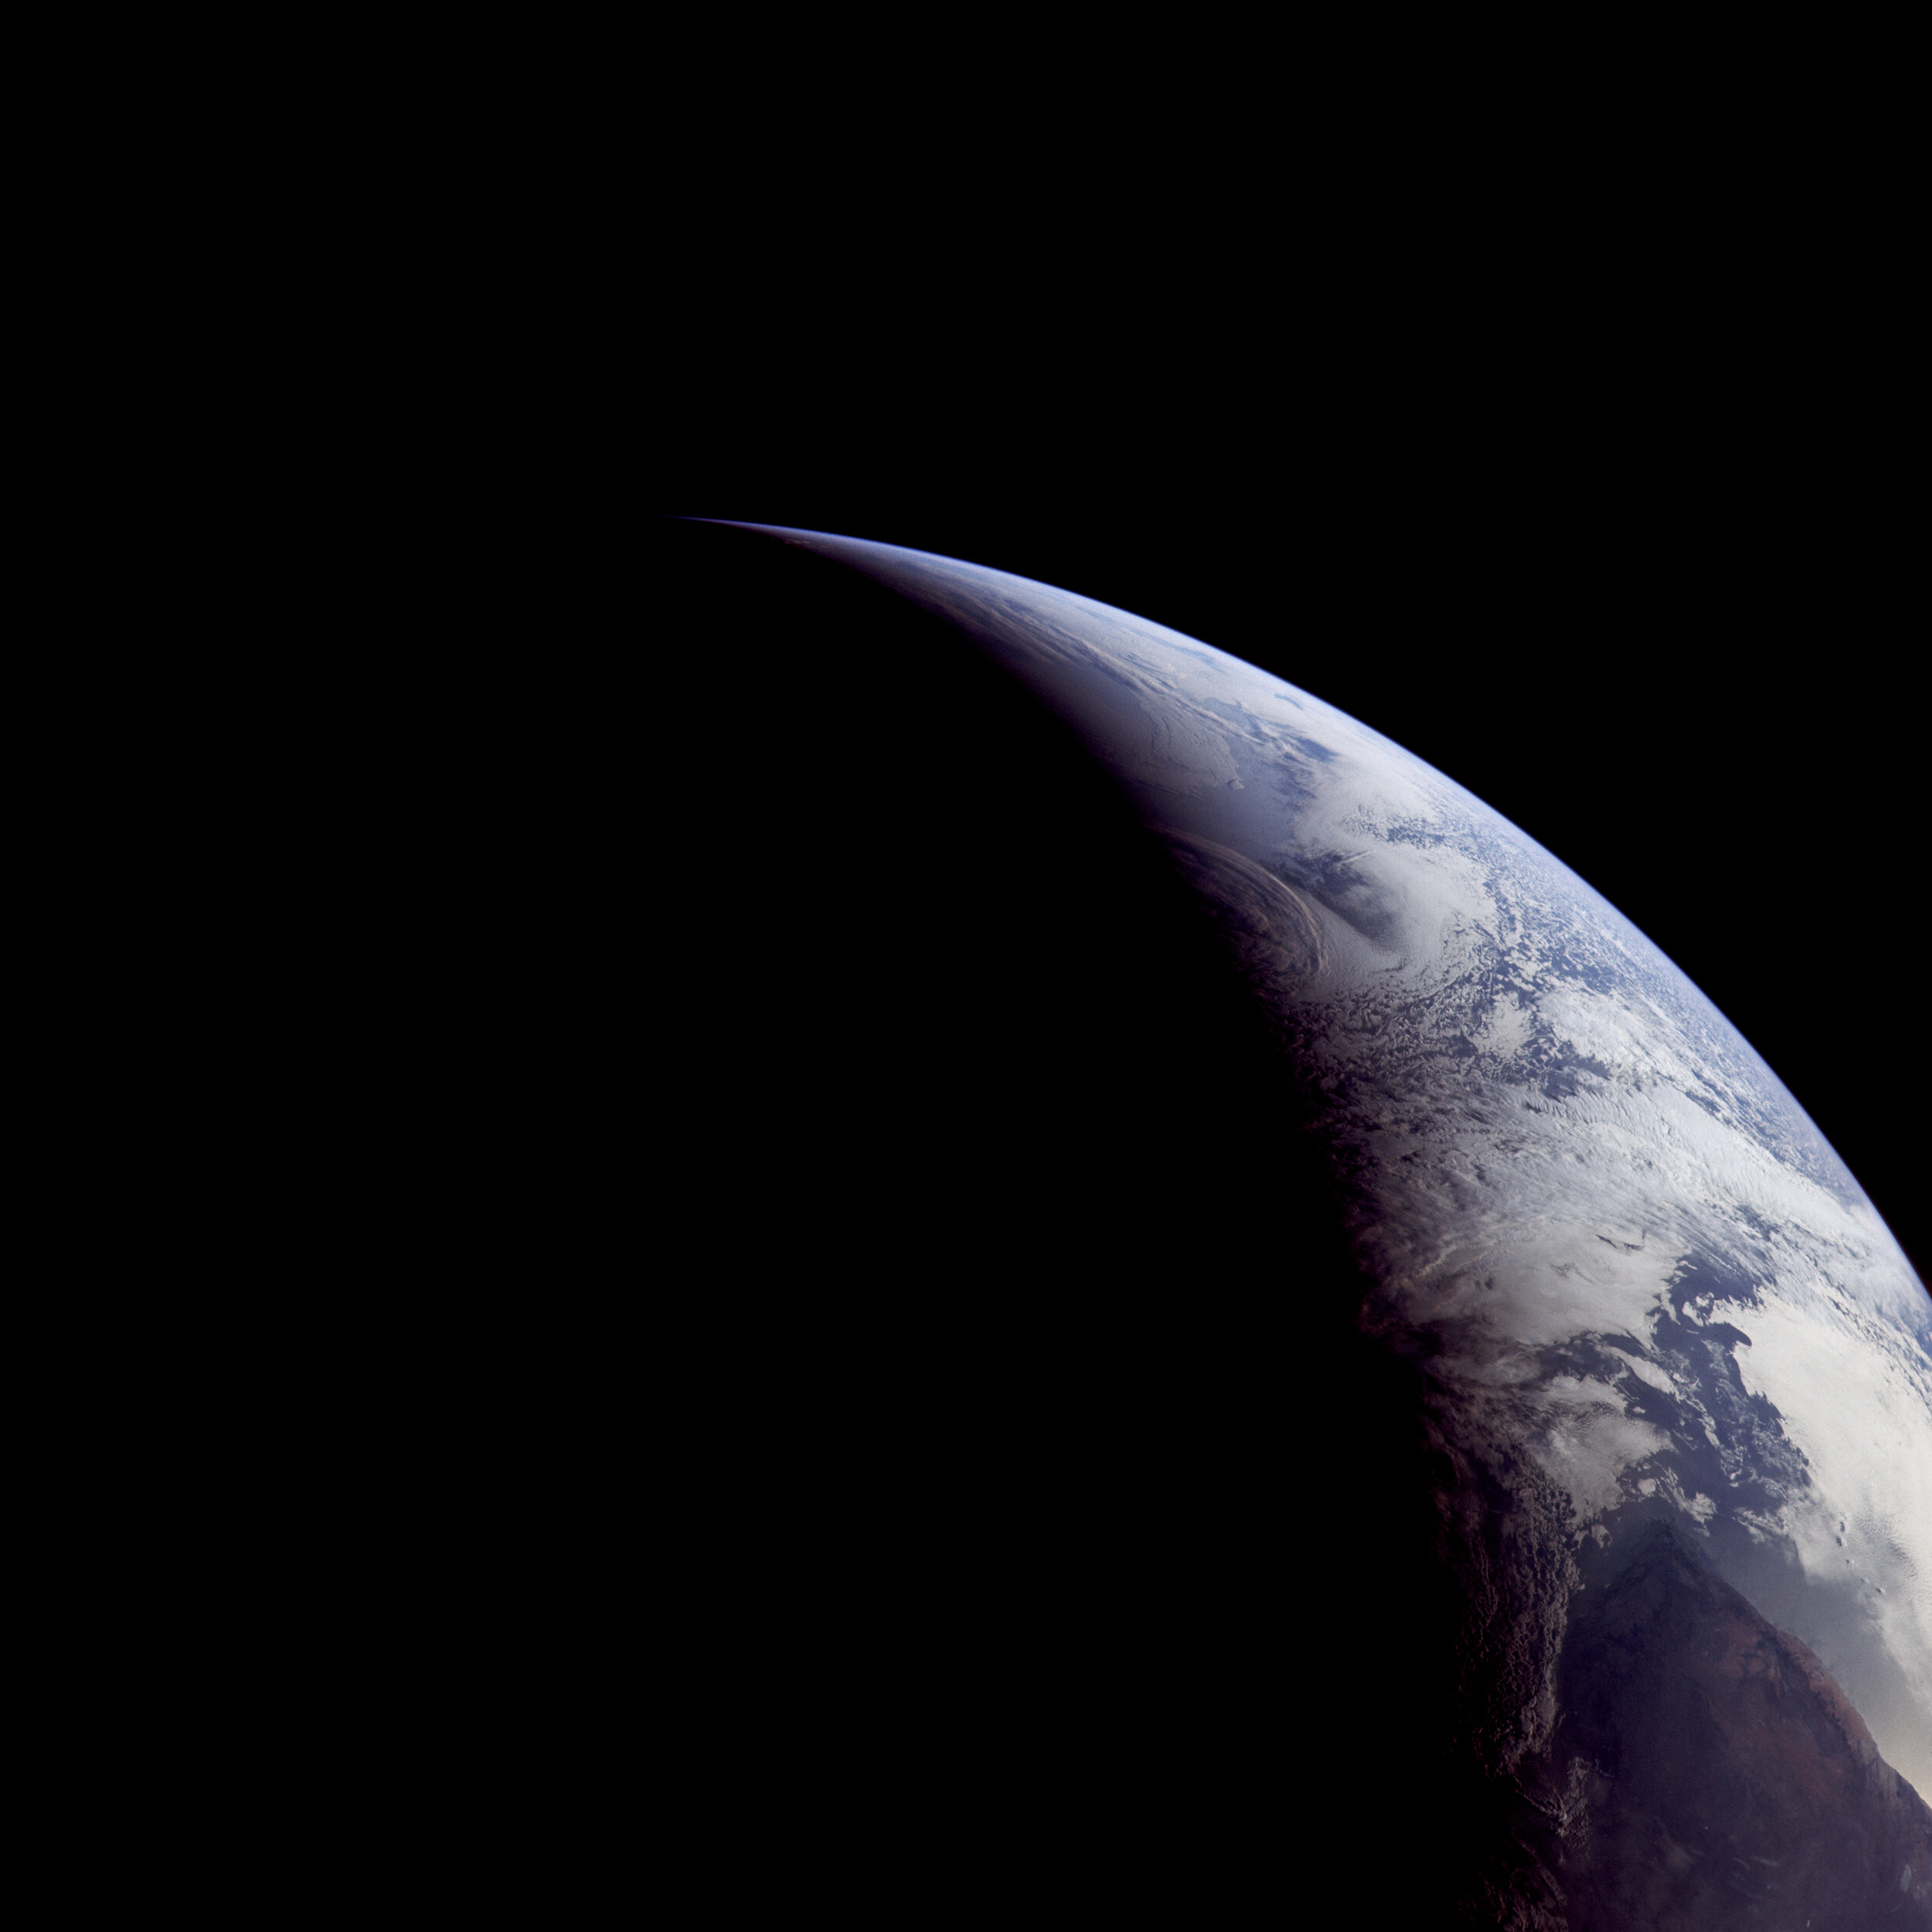  Apollo 11  Taken by the Apollo 11 crew on their way home. In this image, North is down. Near the bottom is the southern tip of Africa, pointing upwards. At the top, we see the crescent Earth taper away to nothing.   ‘The thing that really surprised 